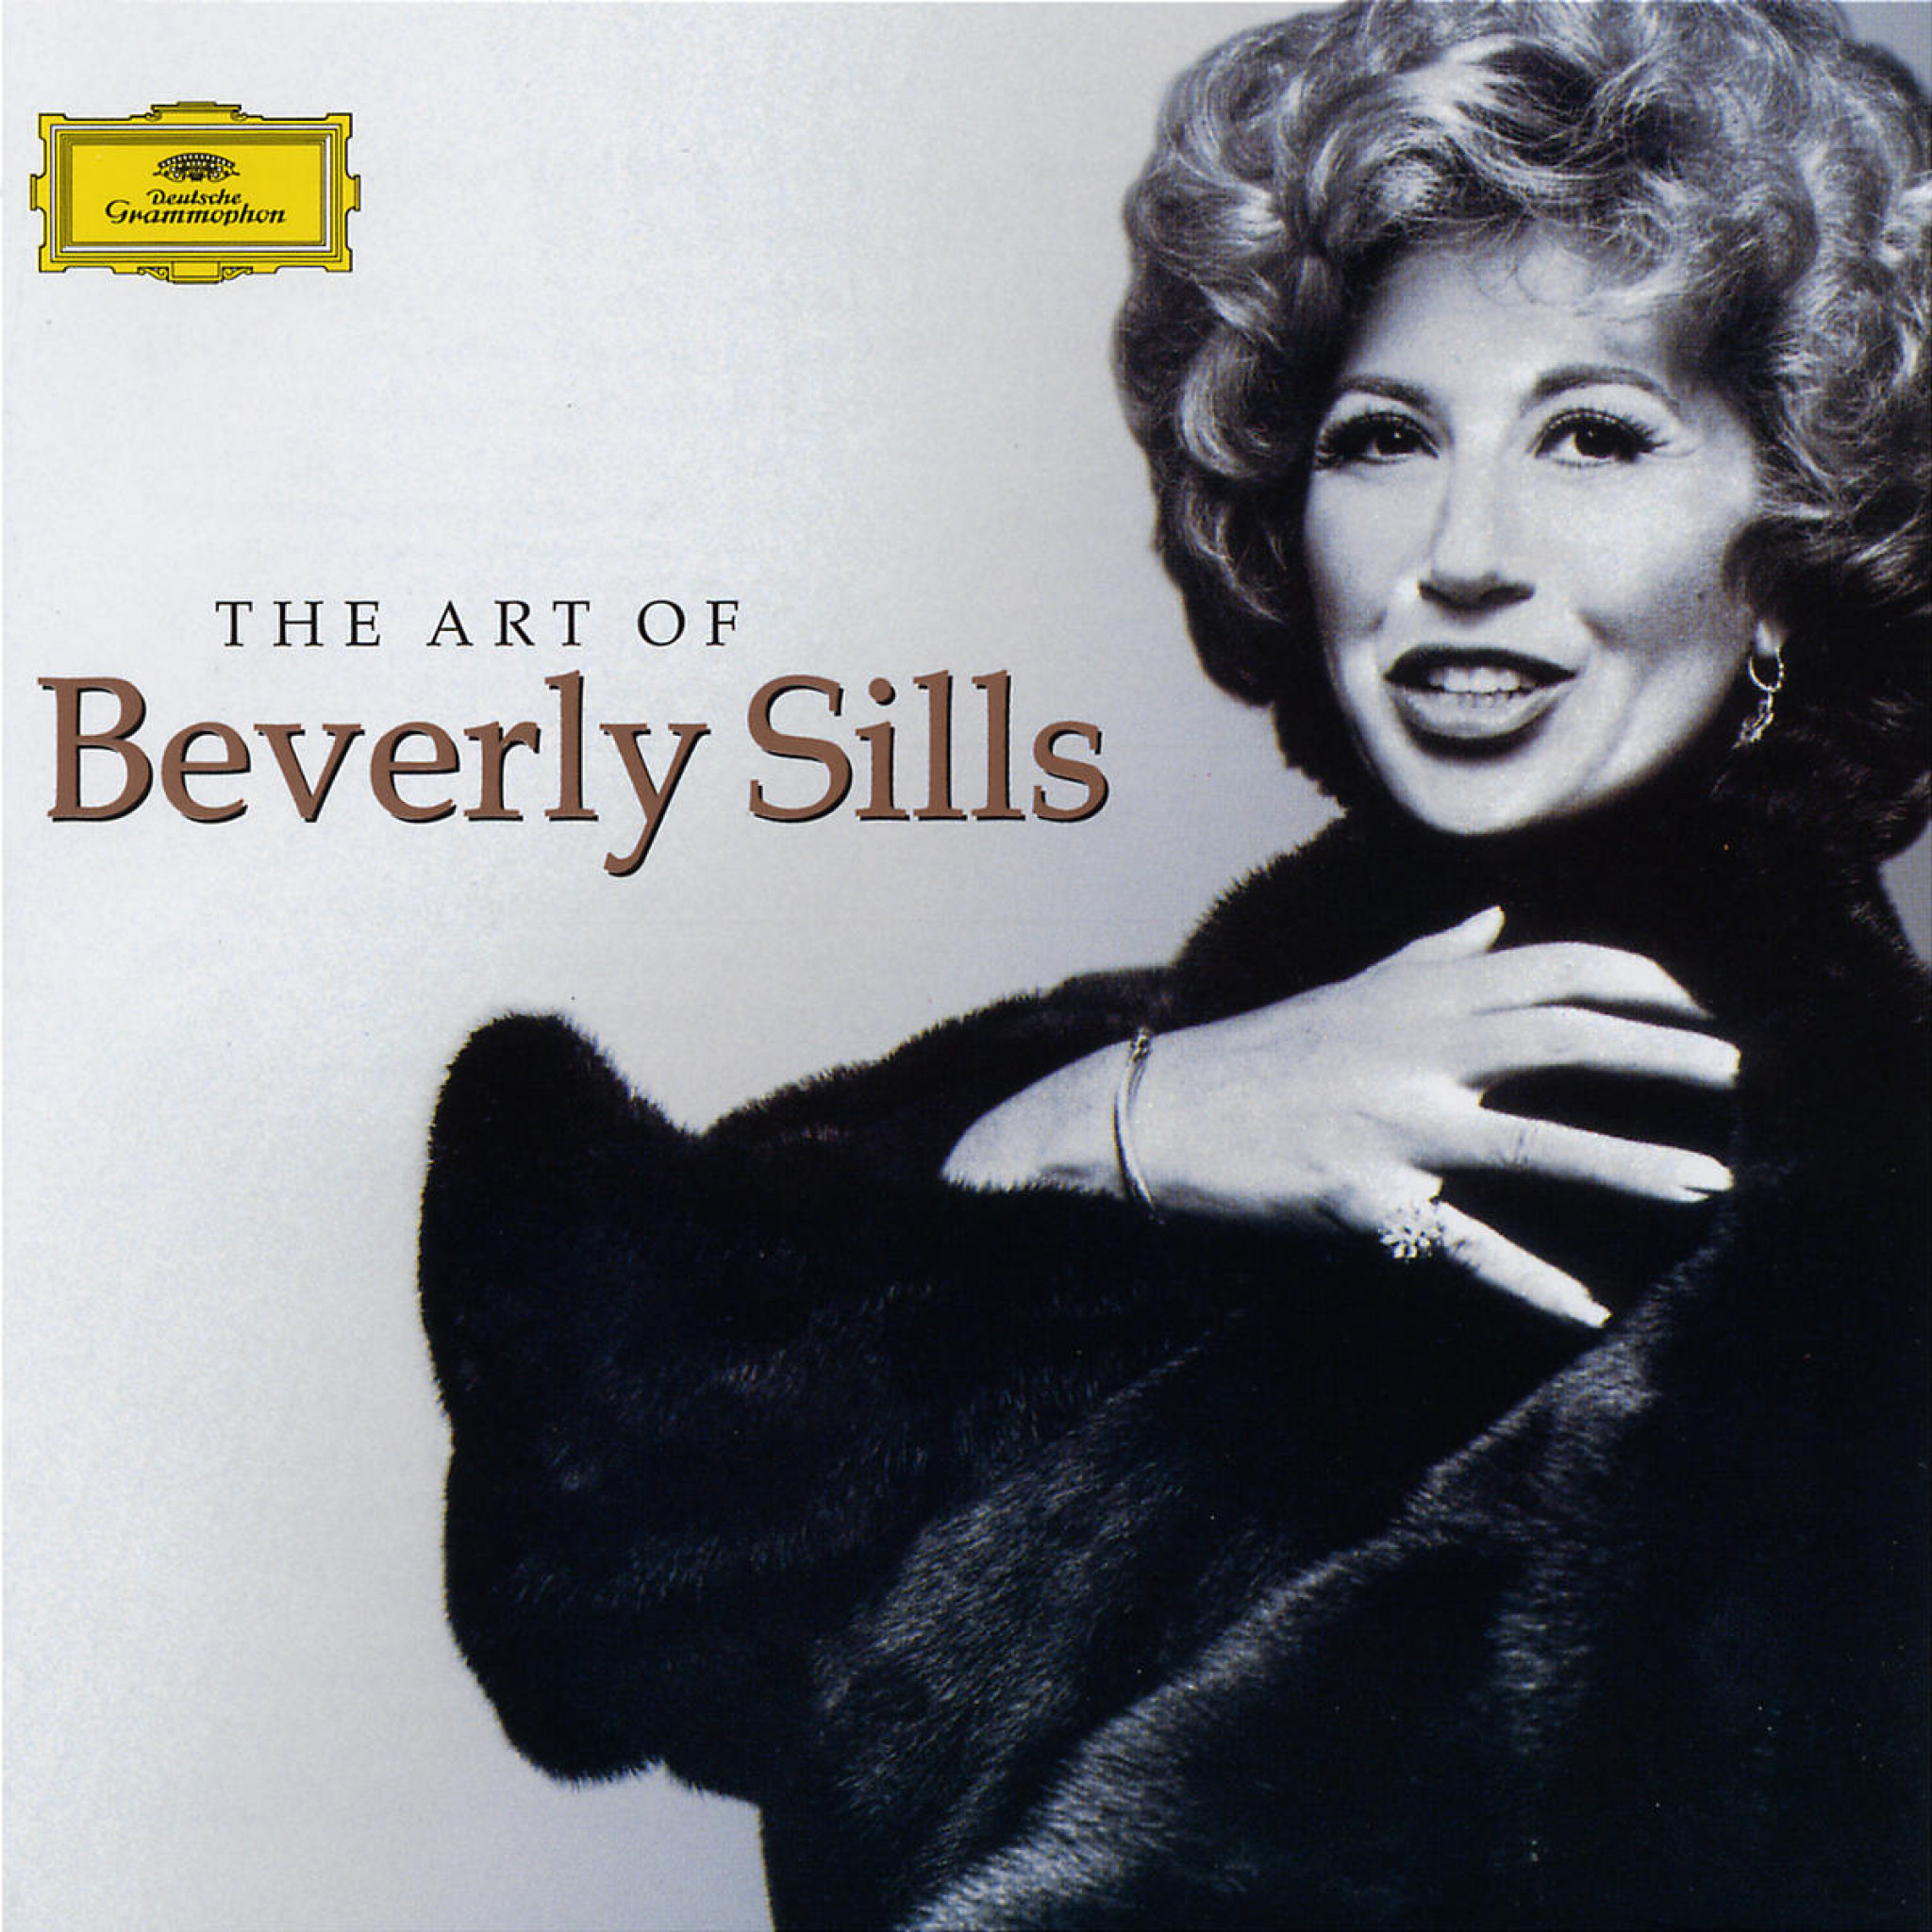 THE ART OF BEVERLY SILLS